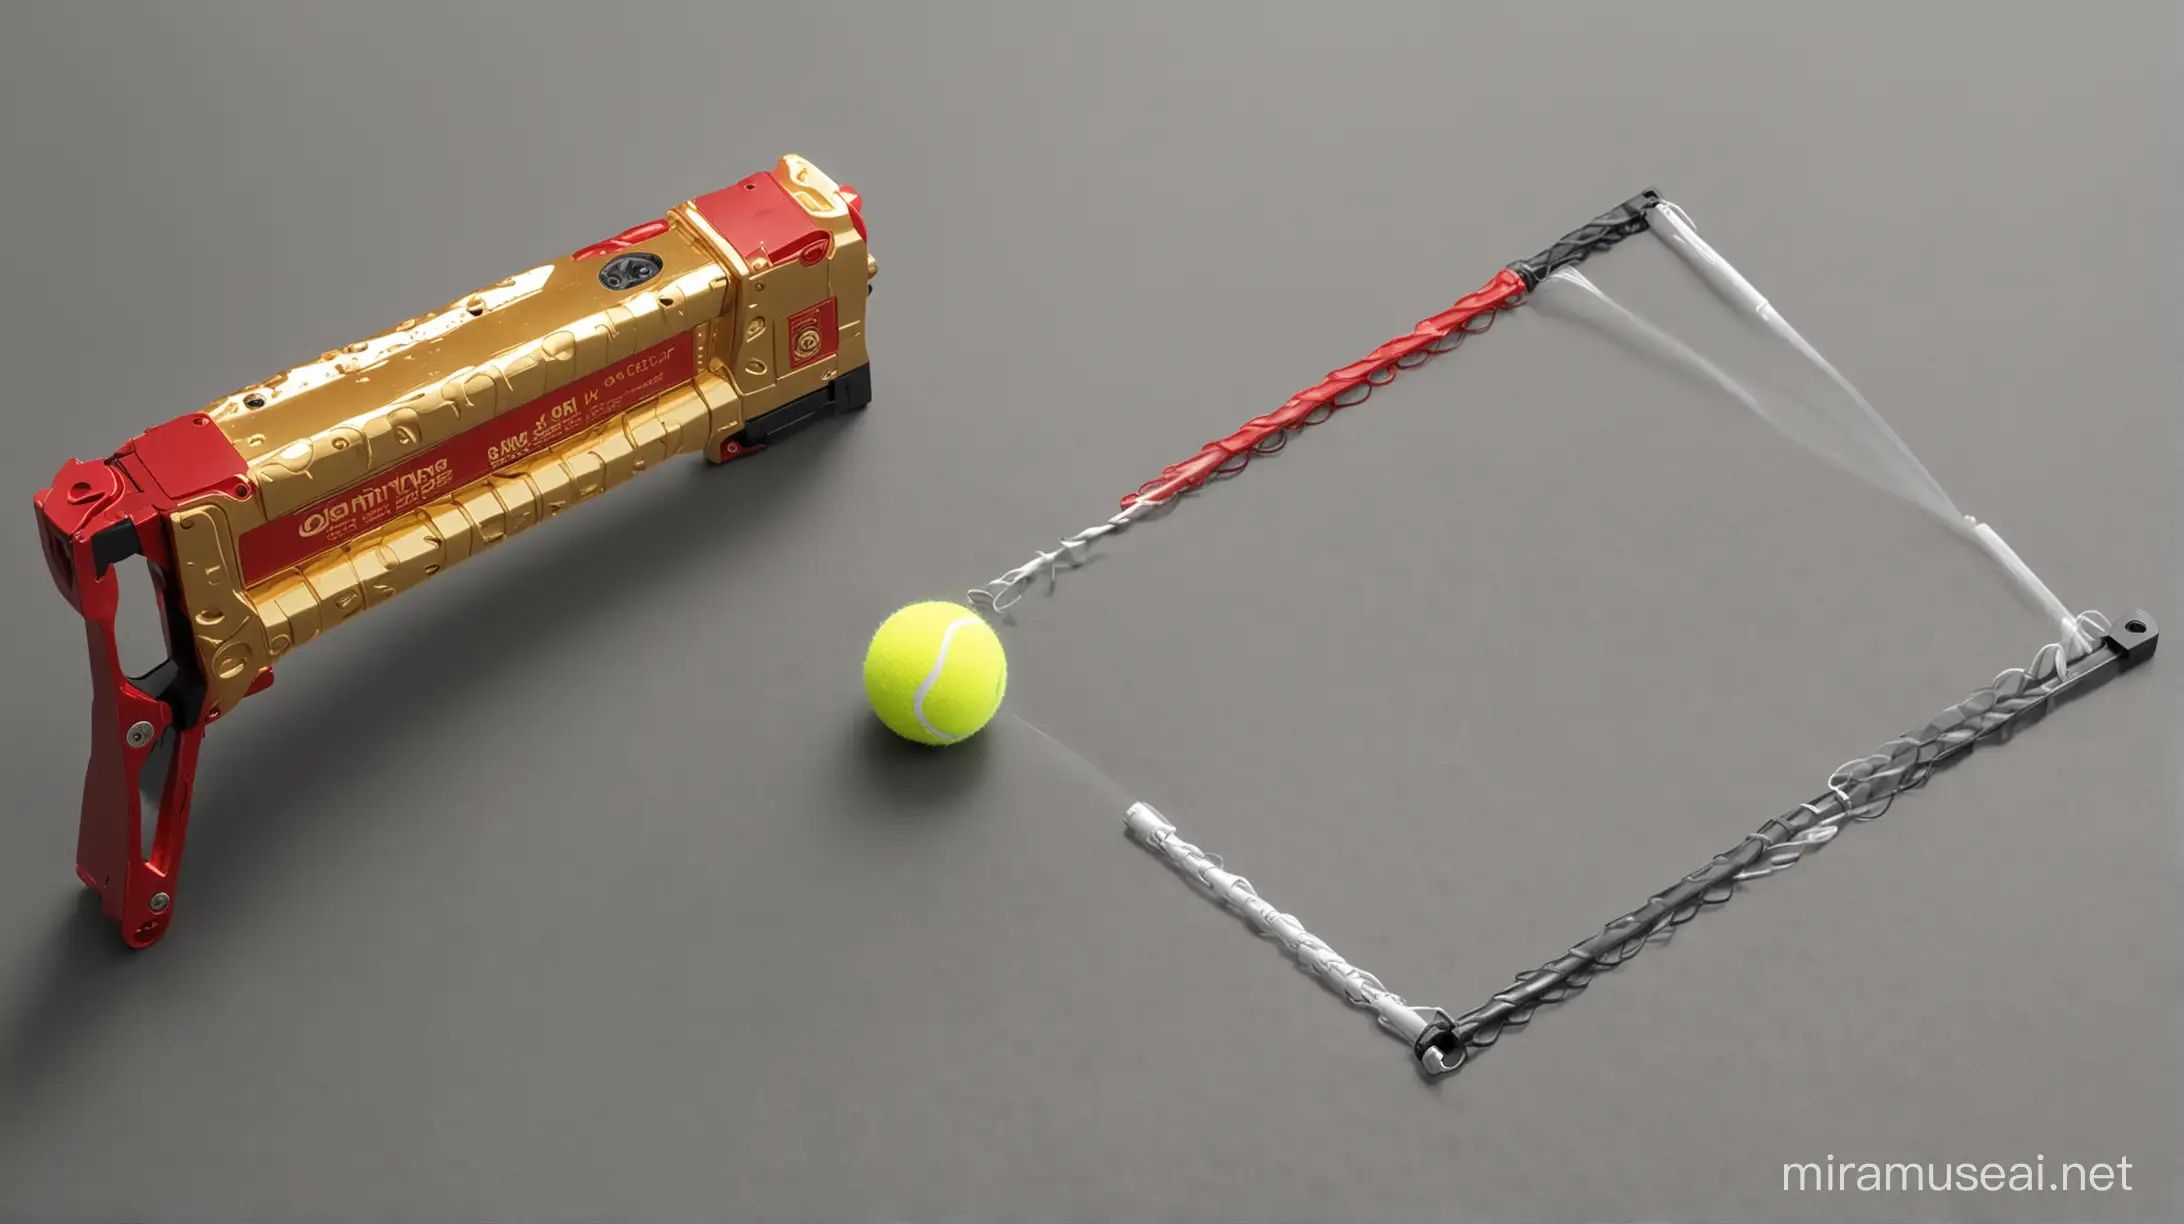 show me a realistic gold & red tennis ball launcher with a digital screen next to it